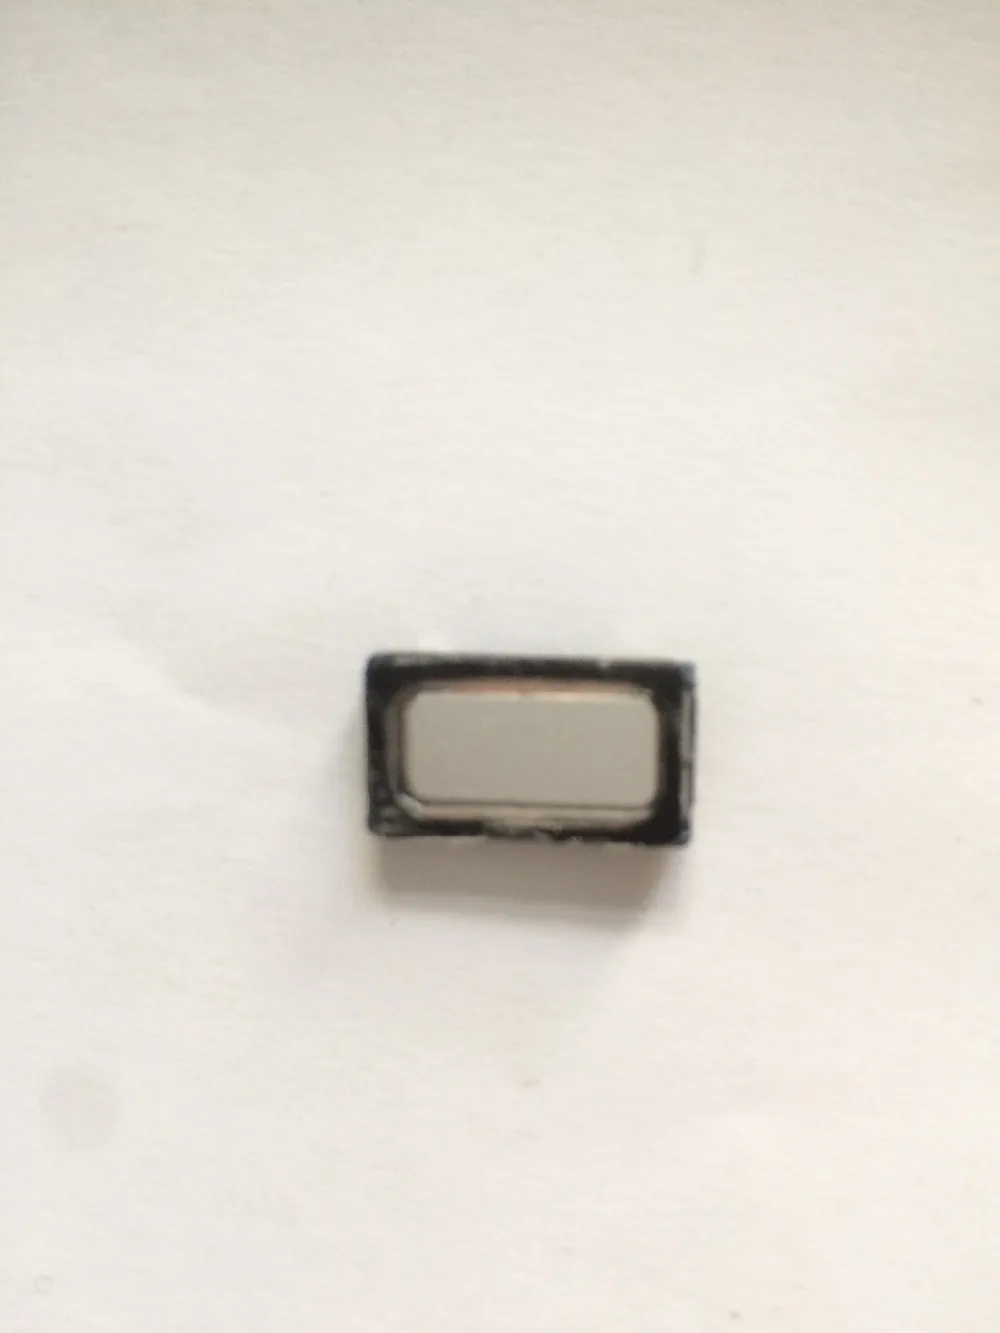 

Used Loud Speaker Buzzer Ringer For Umi Max 5.5" FHD MTK6755M Octa Core 1920*1080 Free Shipping